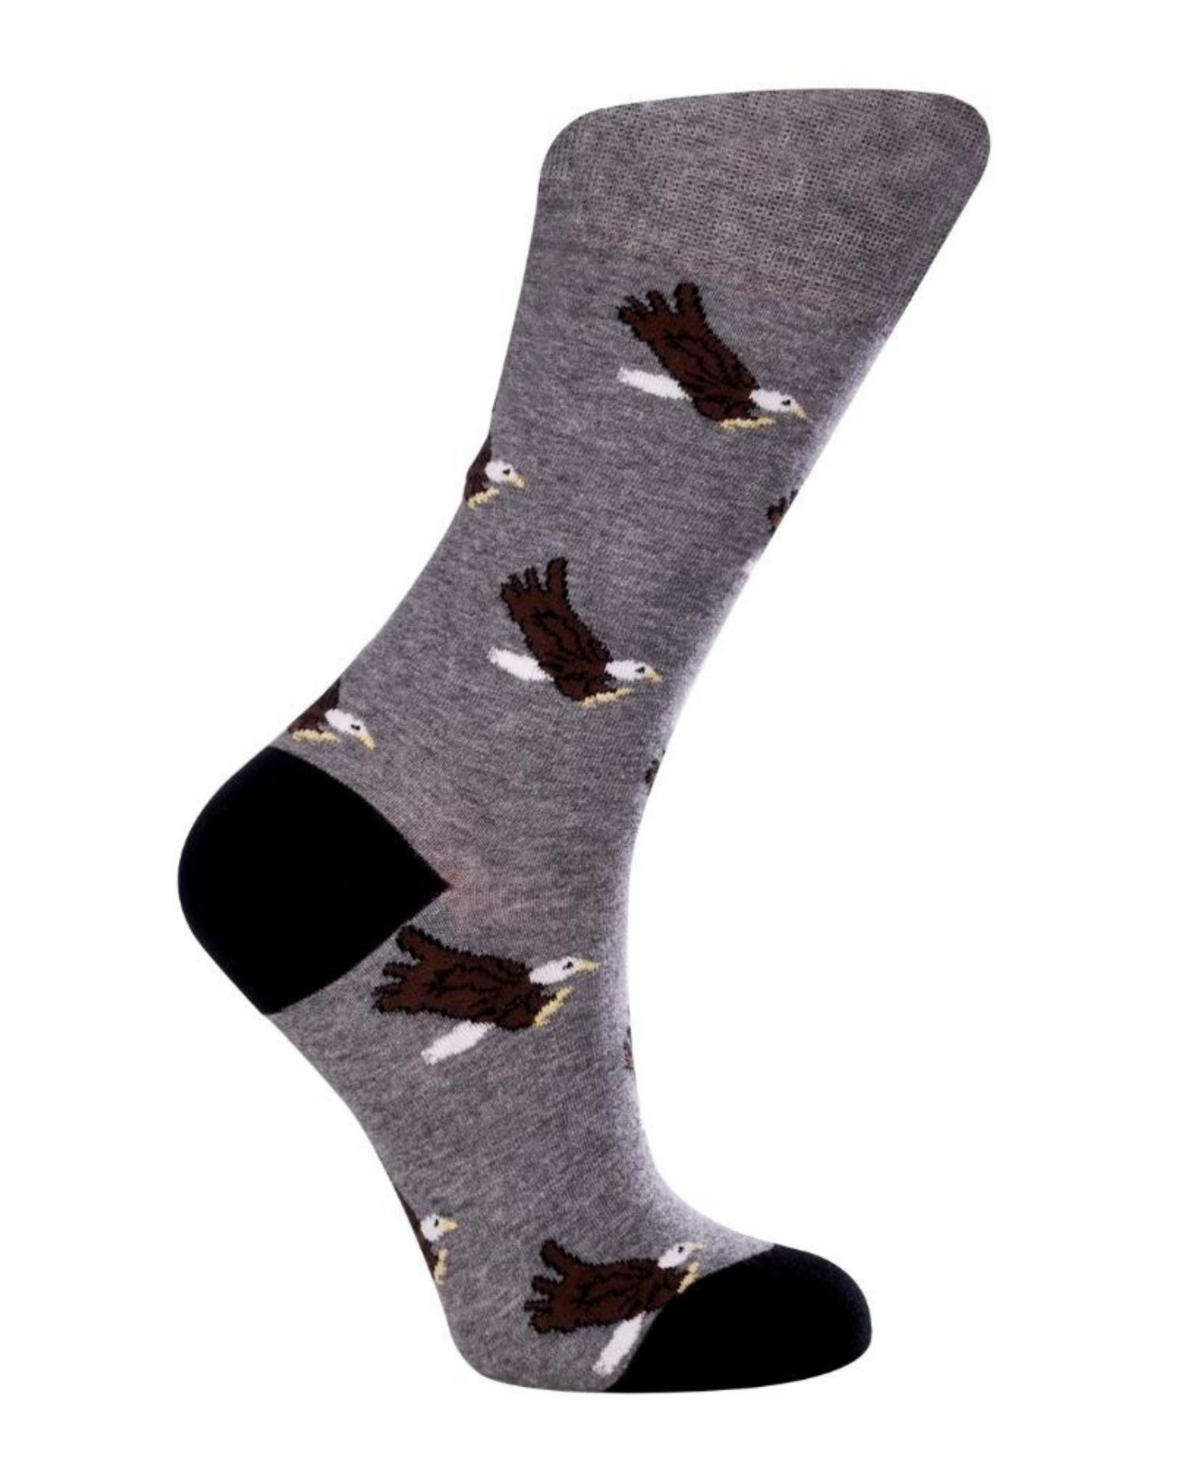 Women's Eagles W-Cotton Dress Socks with Seamless Toe Design, Pack of 1 - Gray